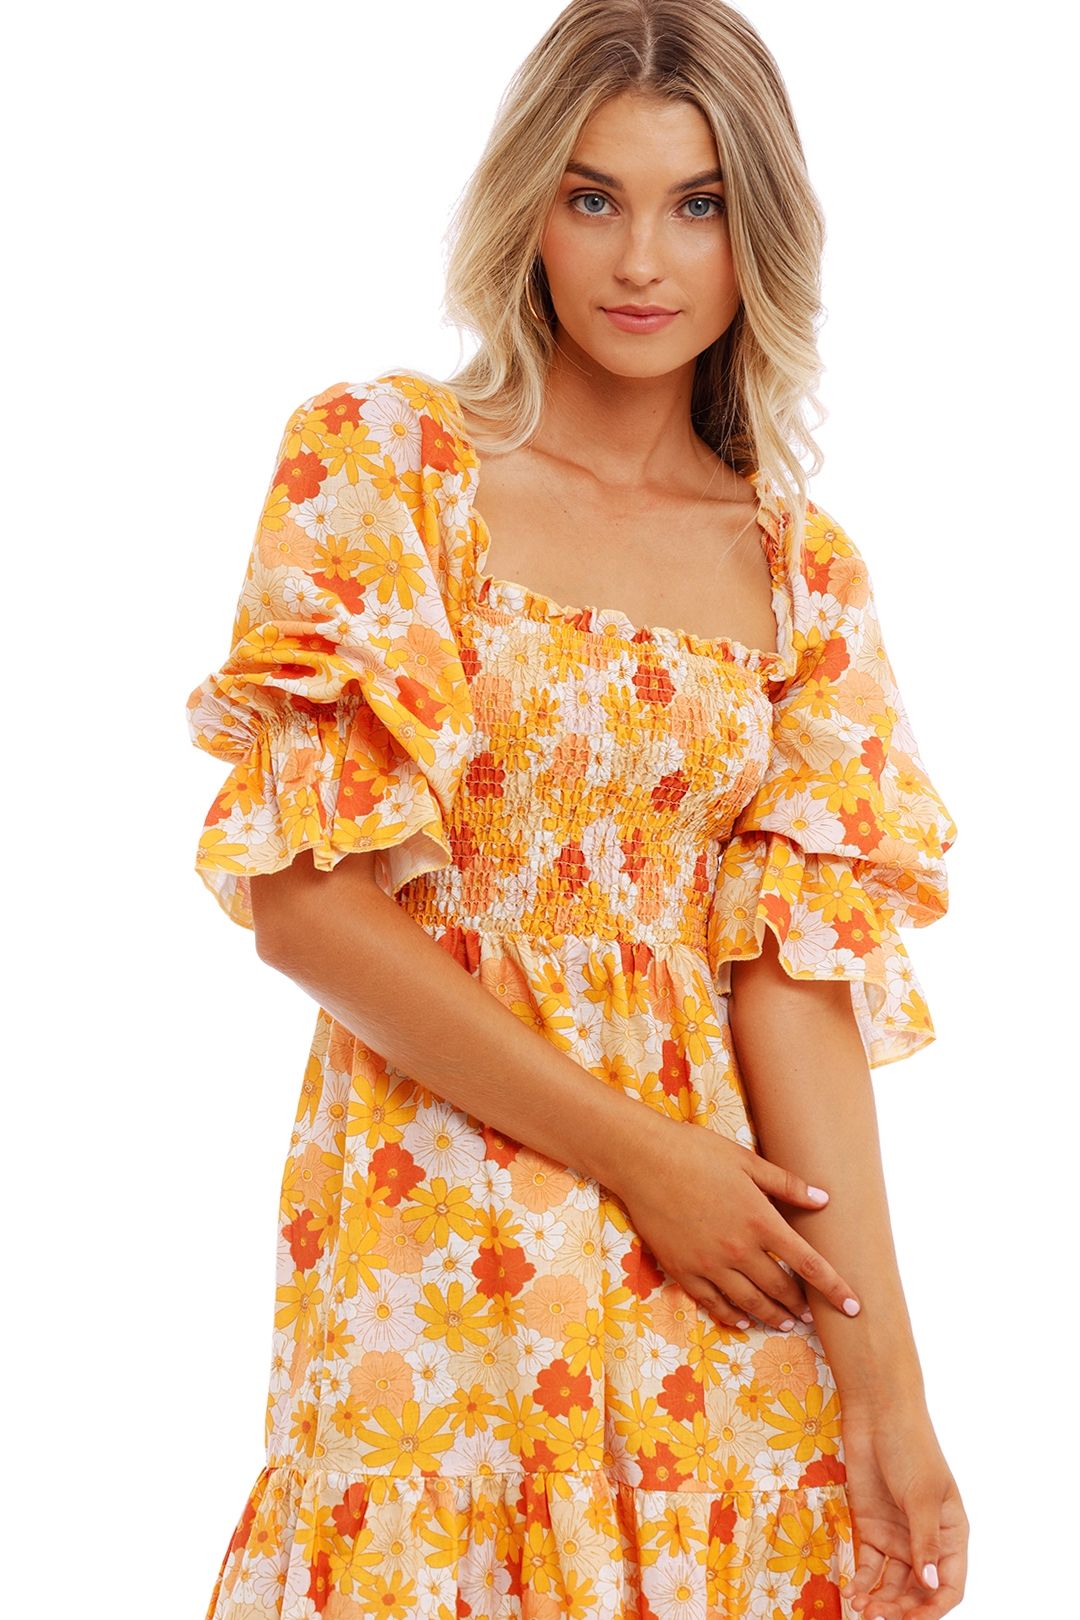 Charlie Holiday Amber Dress Seventies Floral balloon